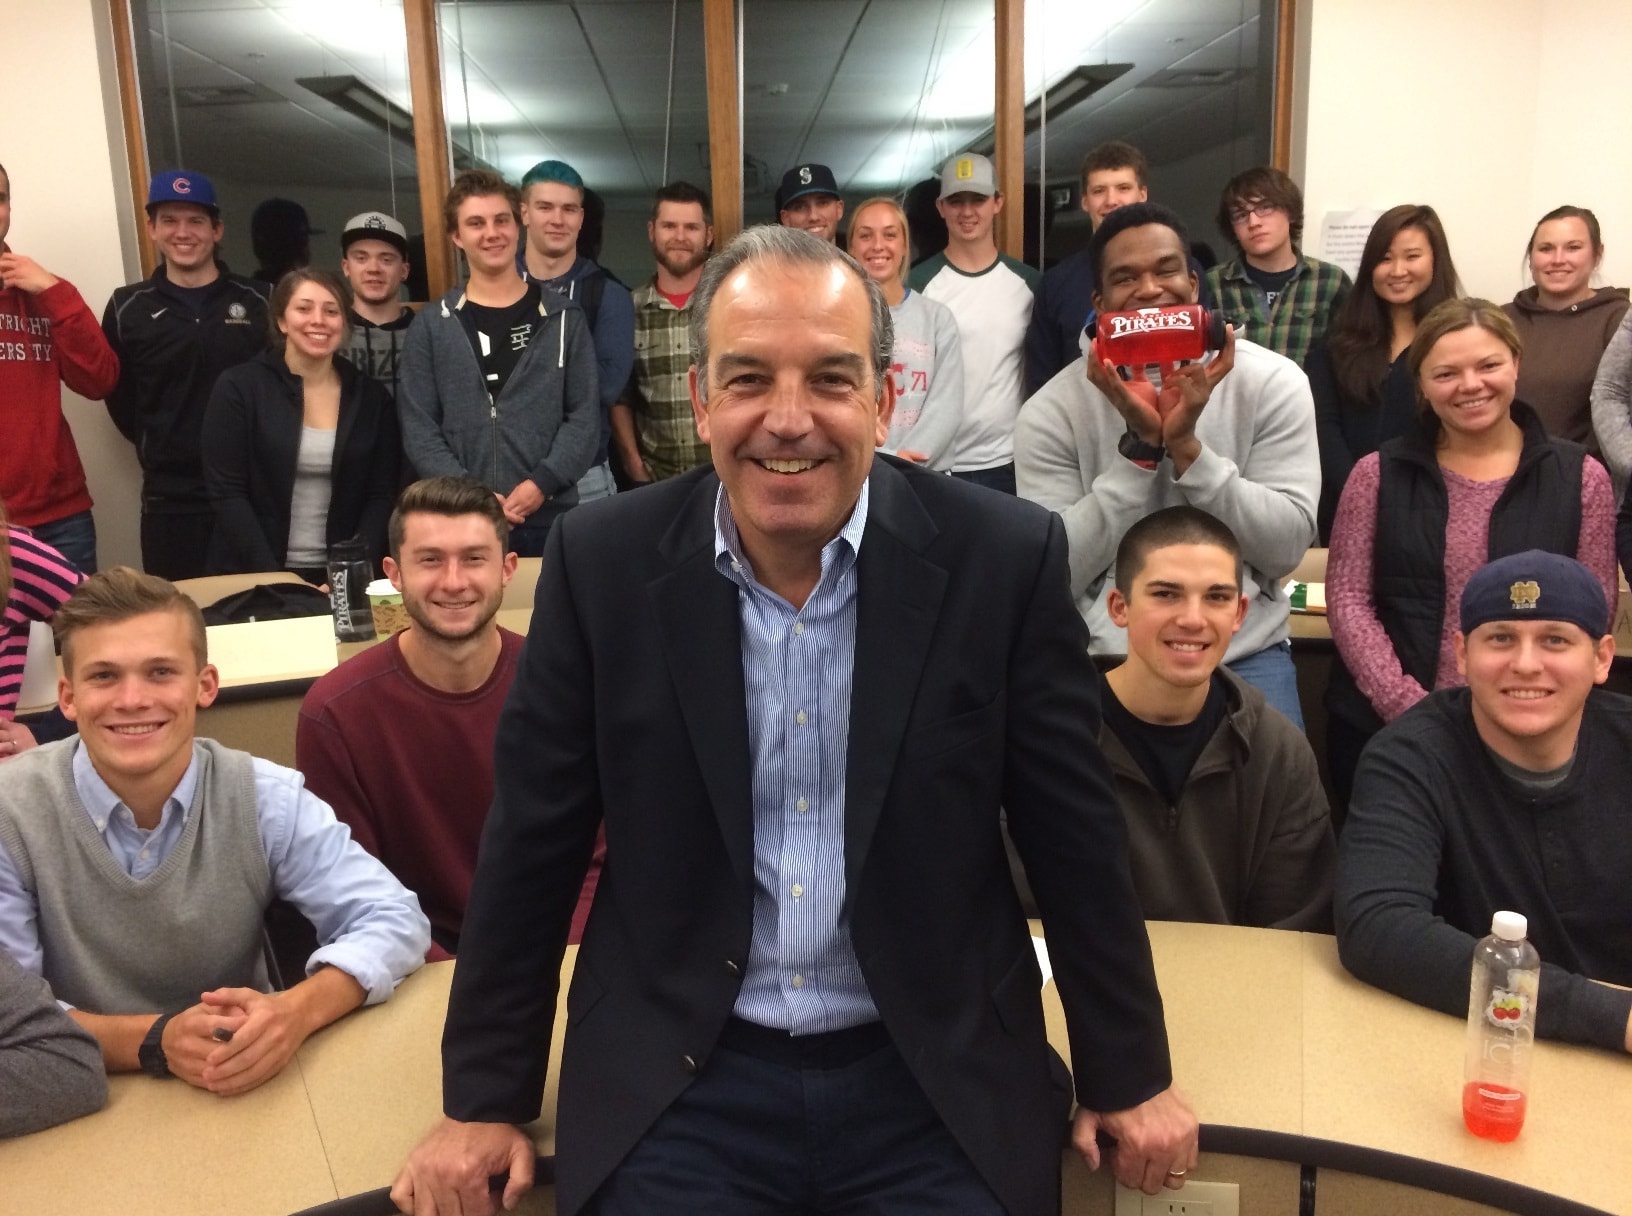 Augie Cruciotti poses with a group of Whitworth business students.